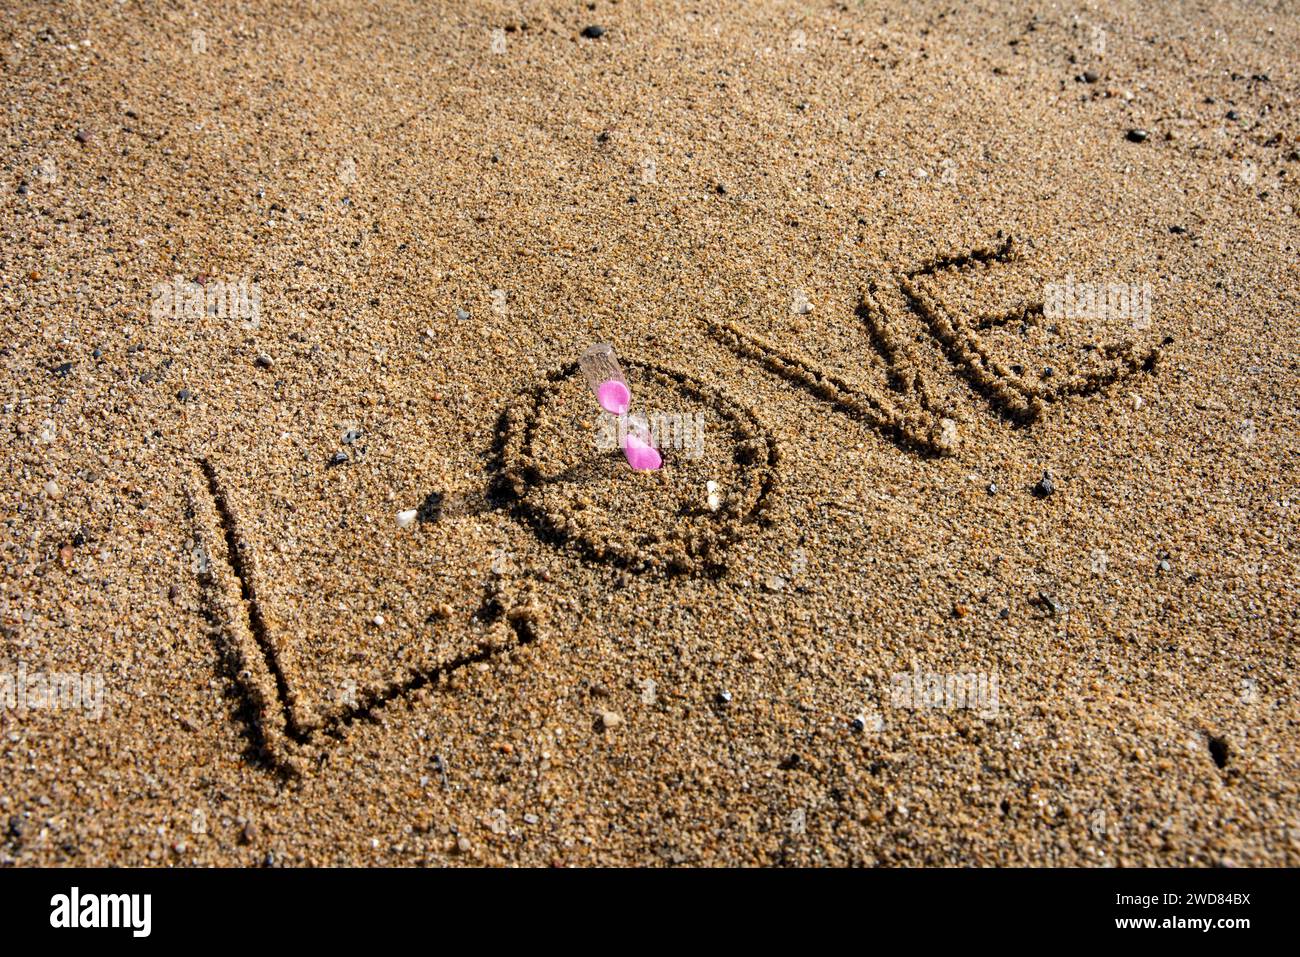 Timeless love: 'Love' inscribed on the beach, cradling a pink-hued hourglass, where romance meets the sands of eternal moments Stock Photo